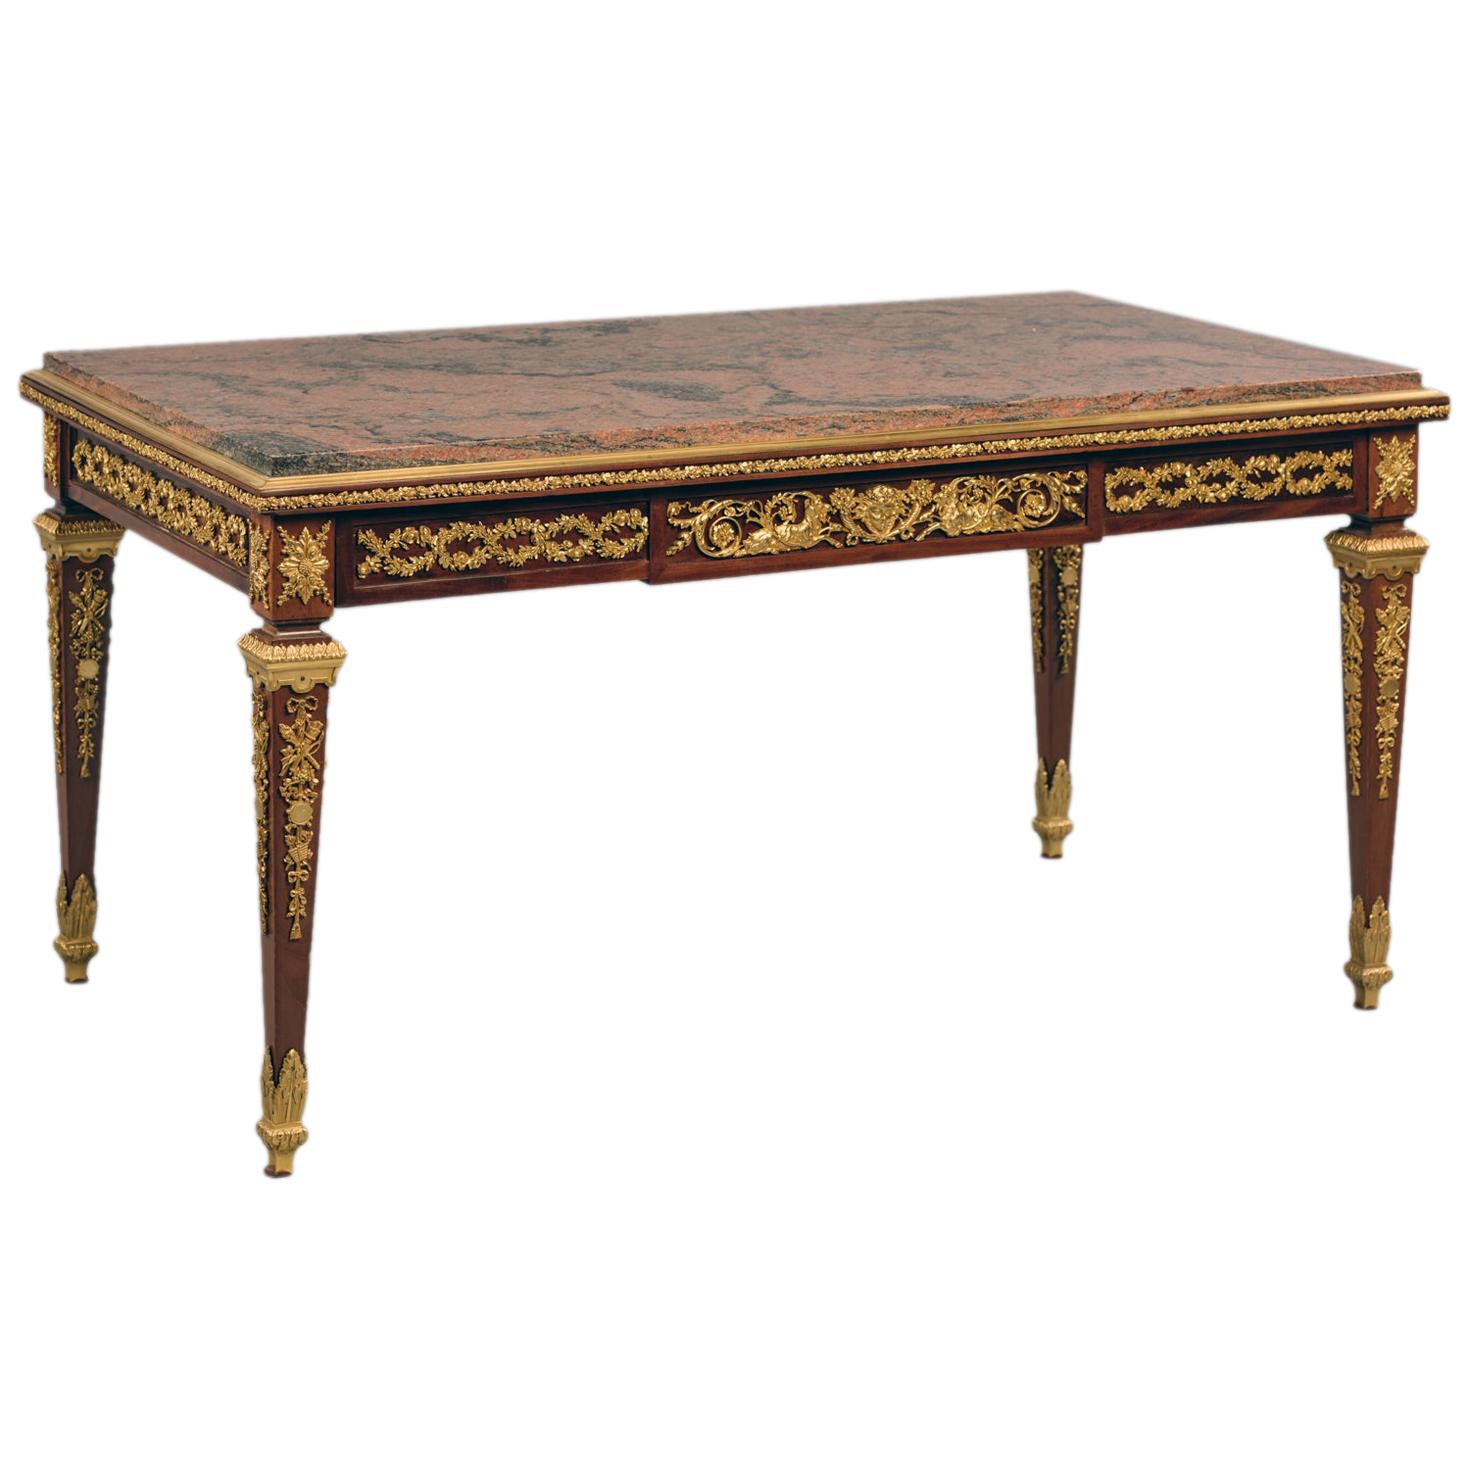 Louis XVI Style Gilt Bronze Mounted Table with a Marble Top. French, c 1890